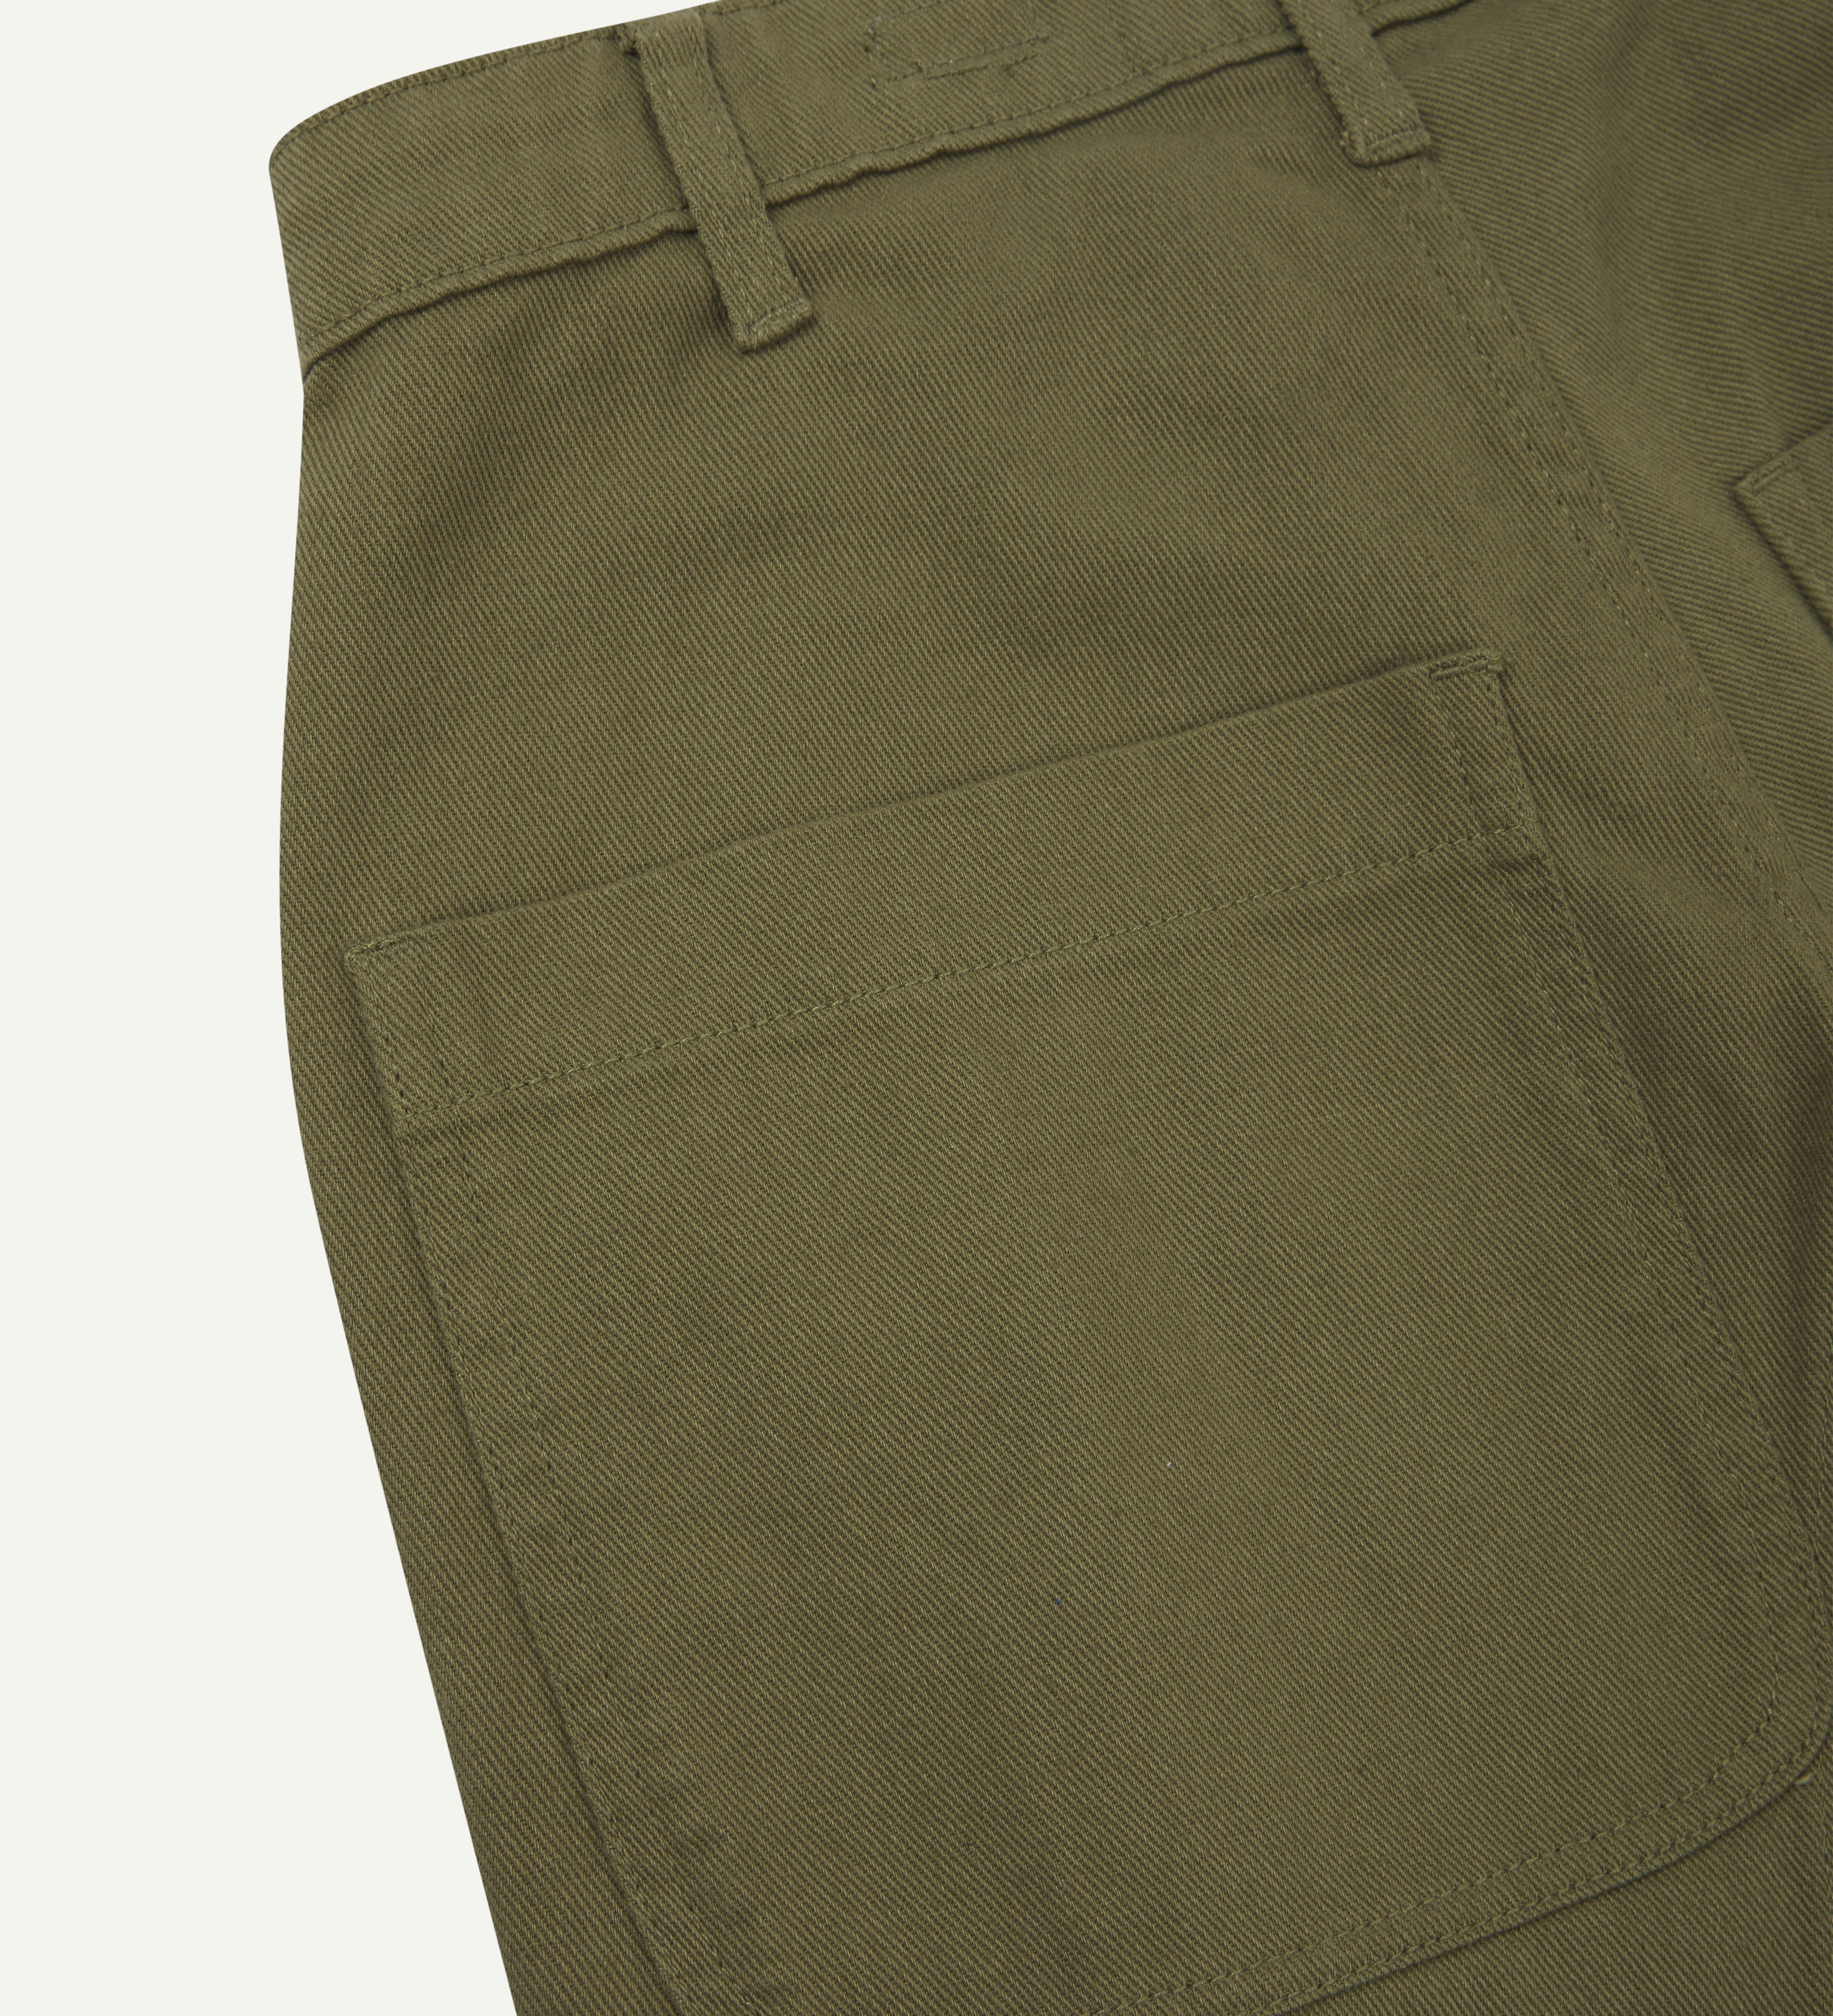 Back close-up view of uskees cotton drill 'commuter' trousers for men in moss green showing belt loops and back pocket.